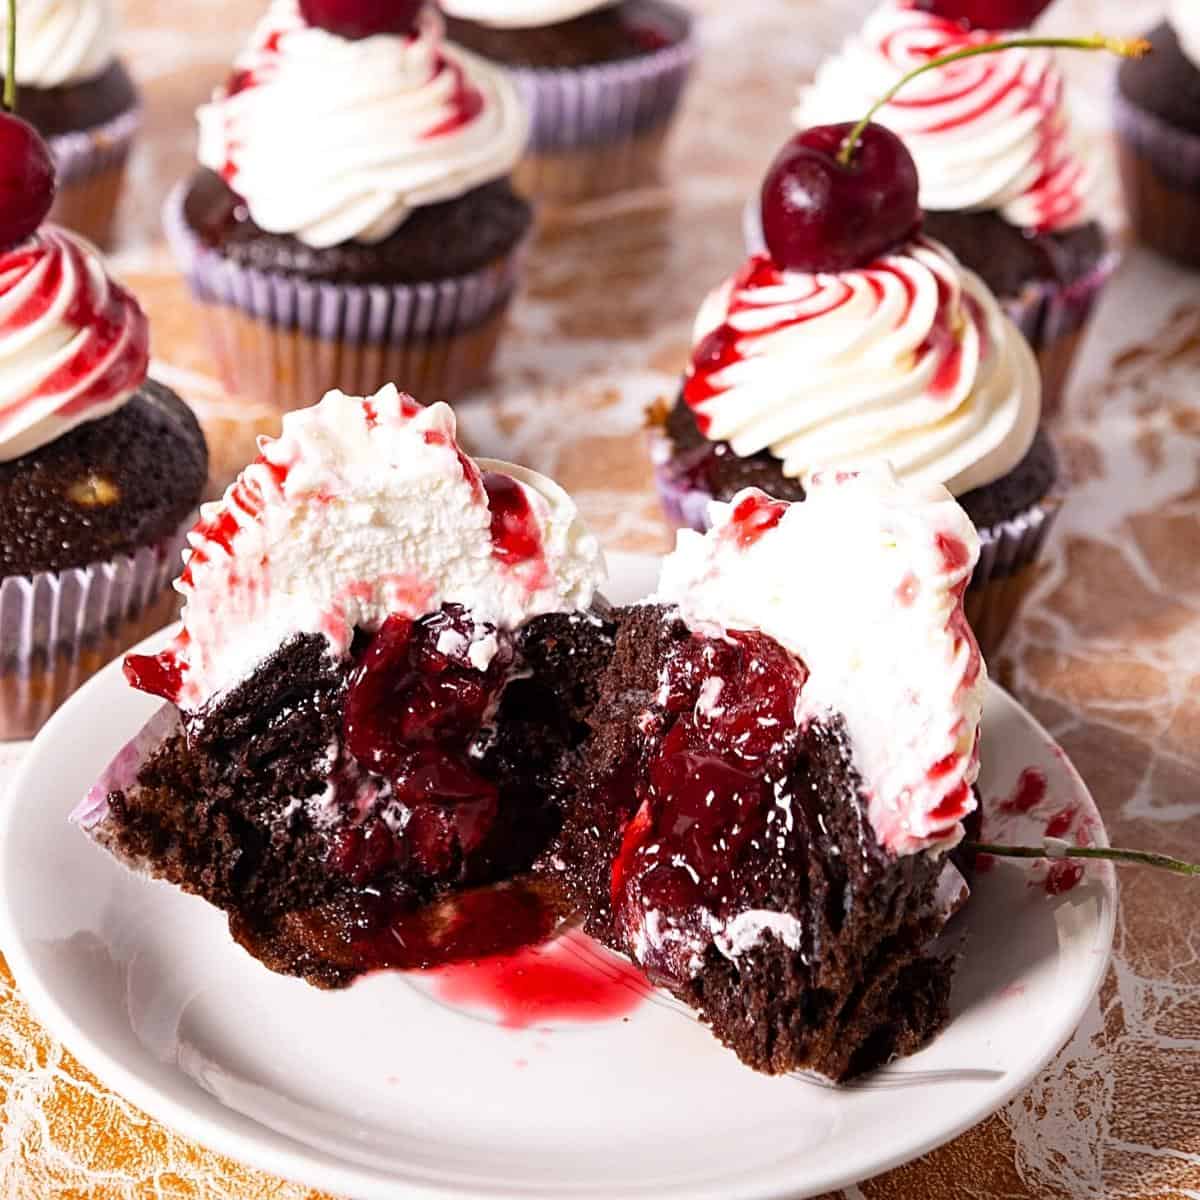 A cut chocolate cupcake with cherry filling and frosting.